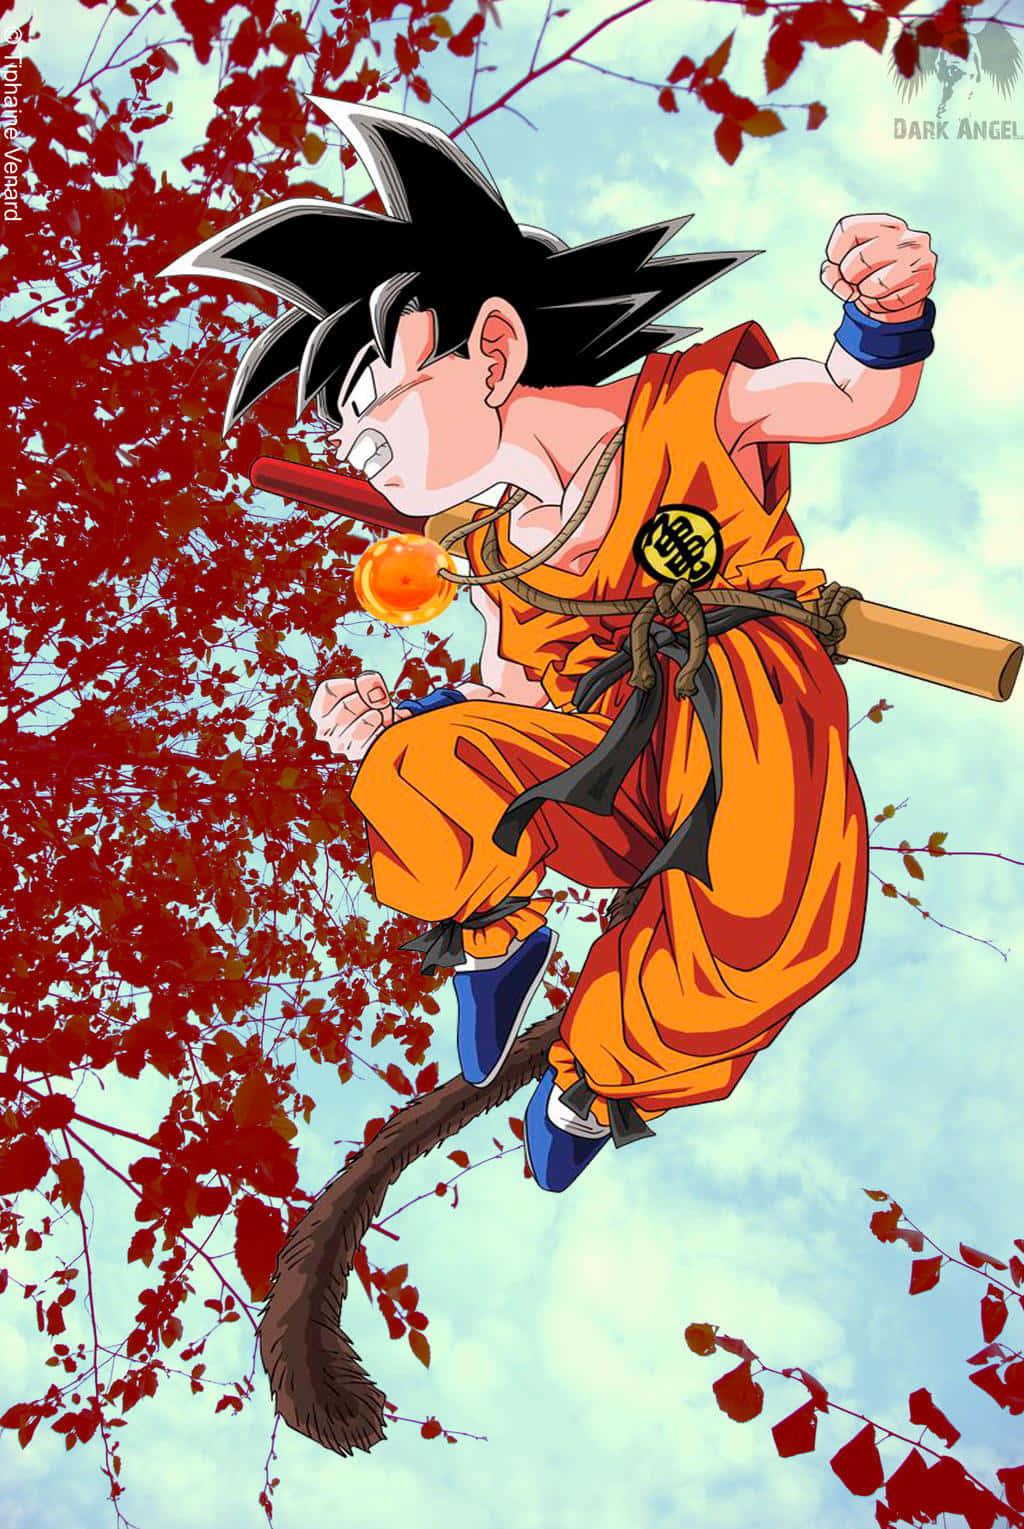 Download A youthful Goku ready to take on new adventures